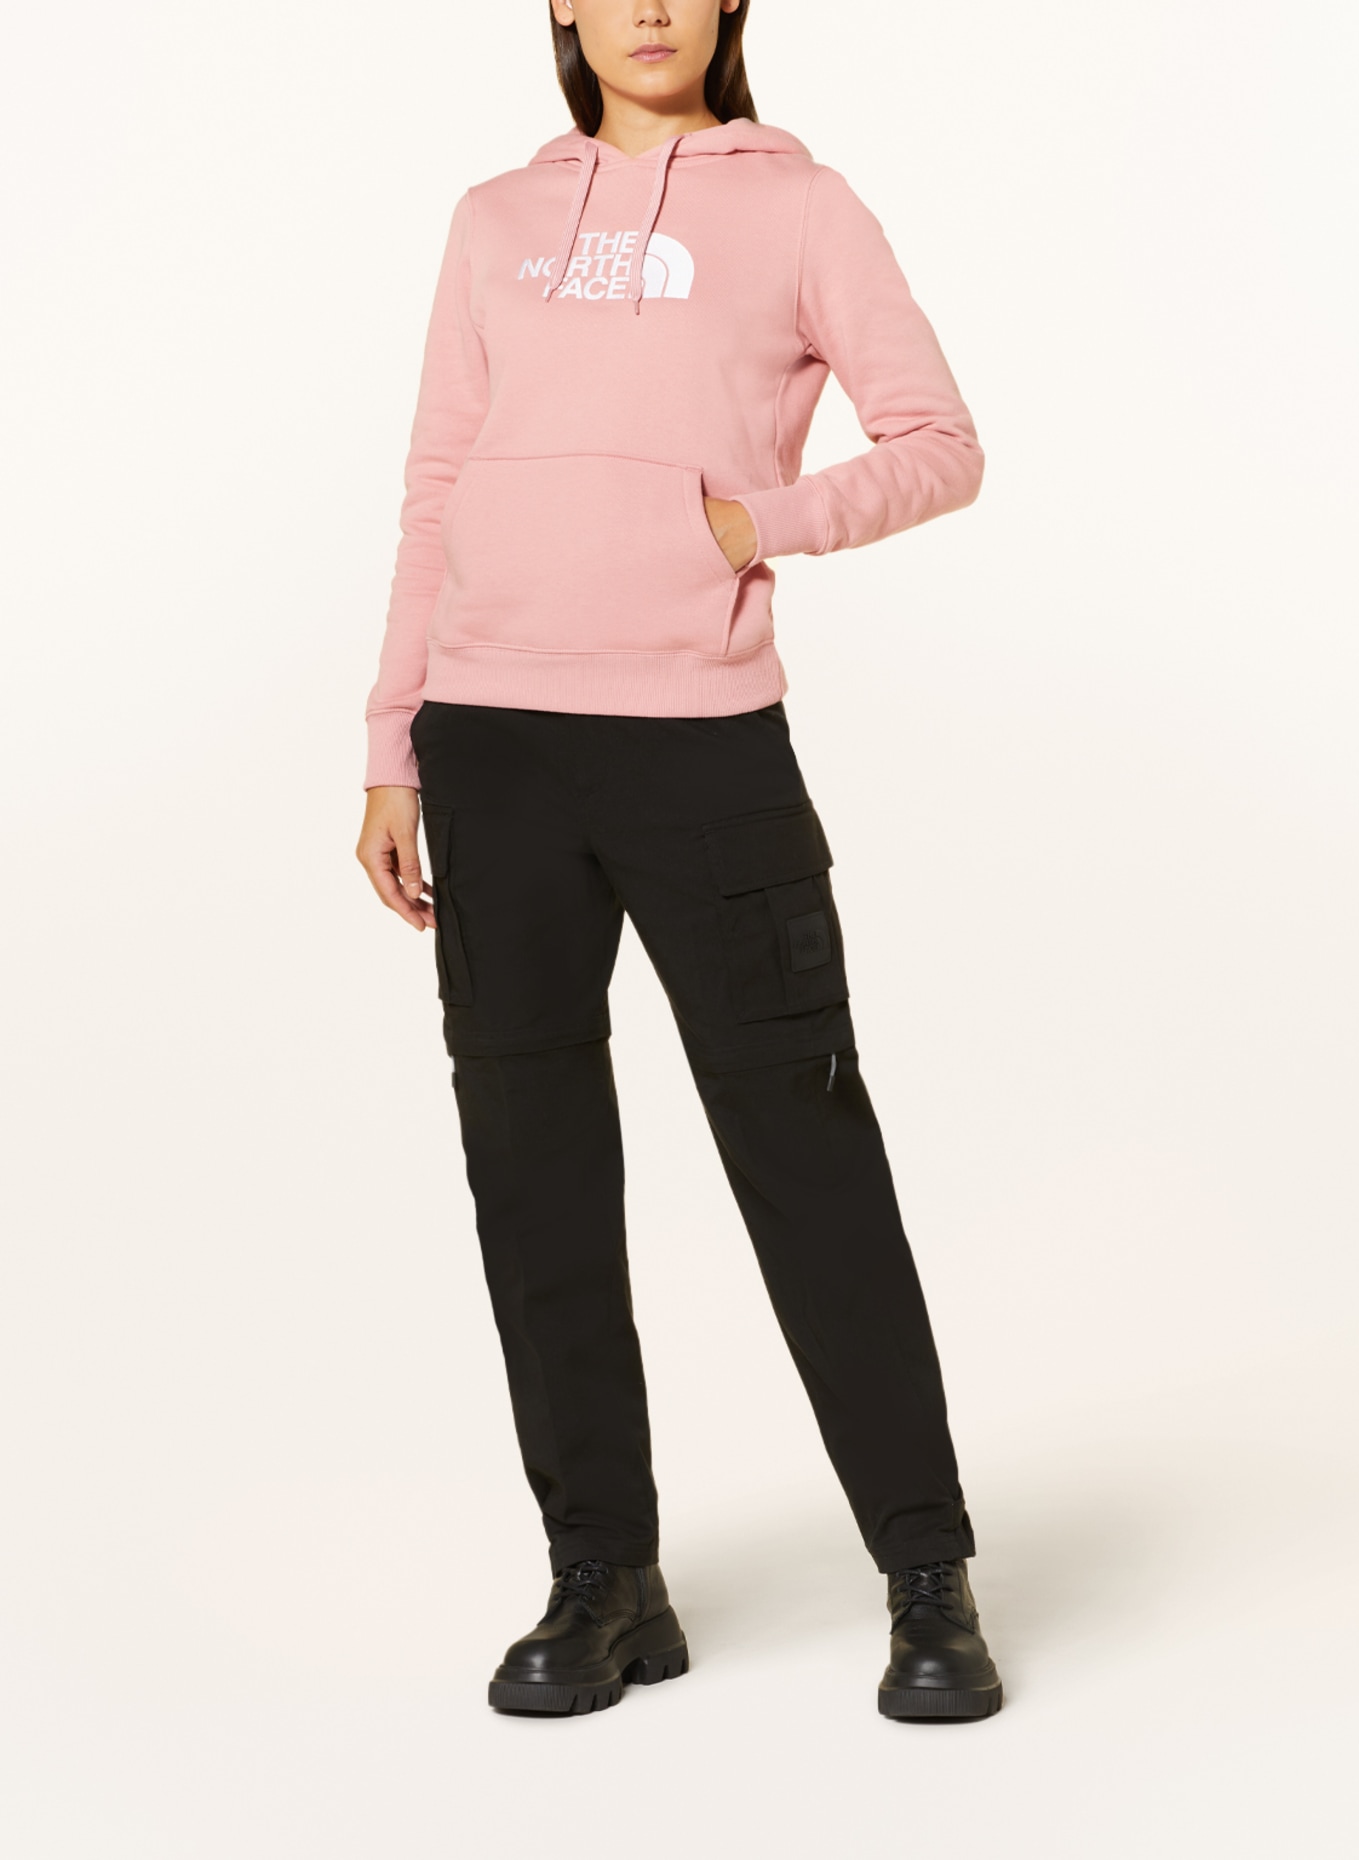 THE NORTH FACE Hoodie DREW, Farbe: ROSÉ/ WEISS (Bild 2)